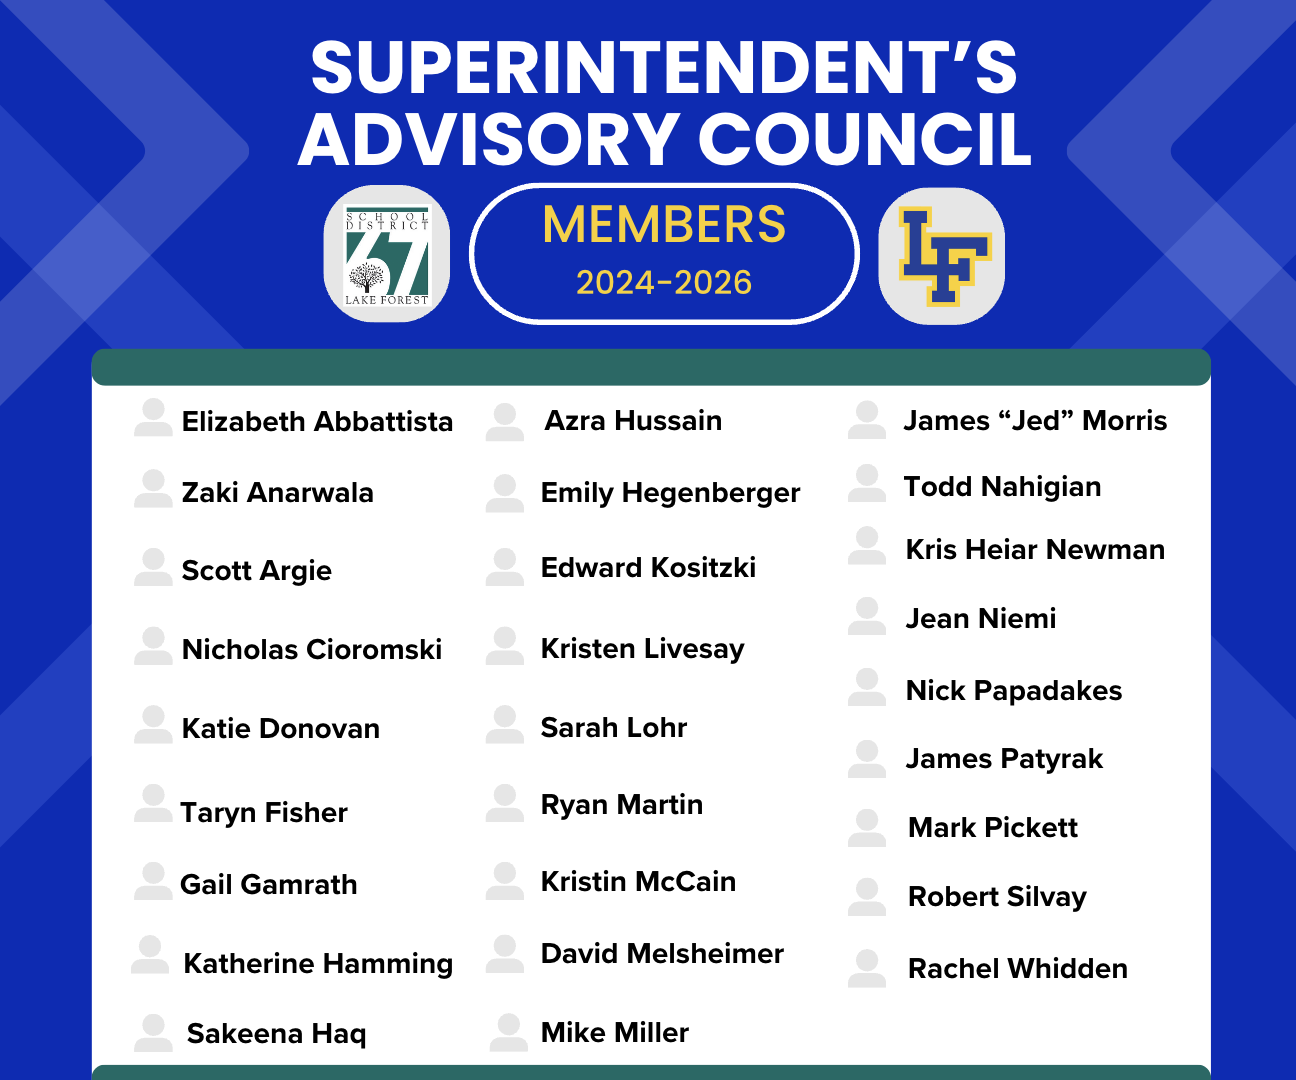 Superintendent's Advisory Council Members